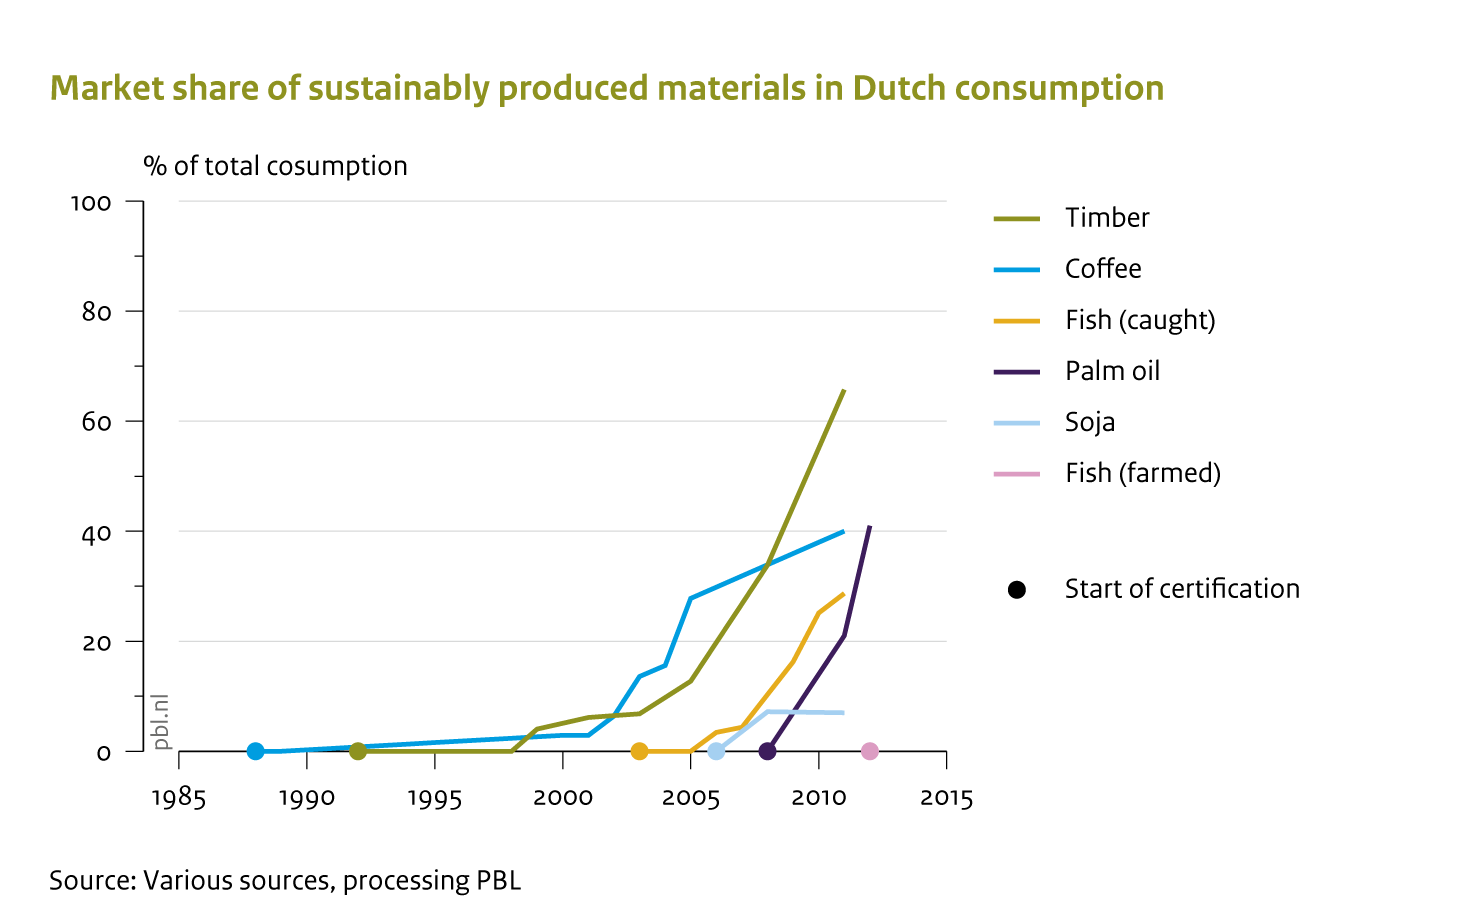 Market shares of certified sustainable products and natural resources have soared over the past two decades in the Netherlands.